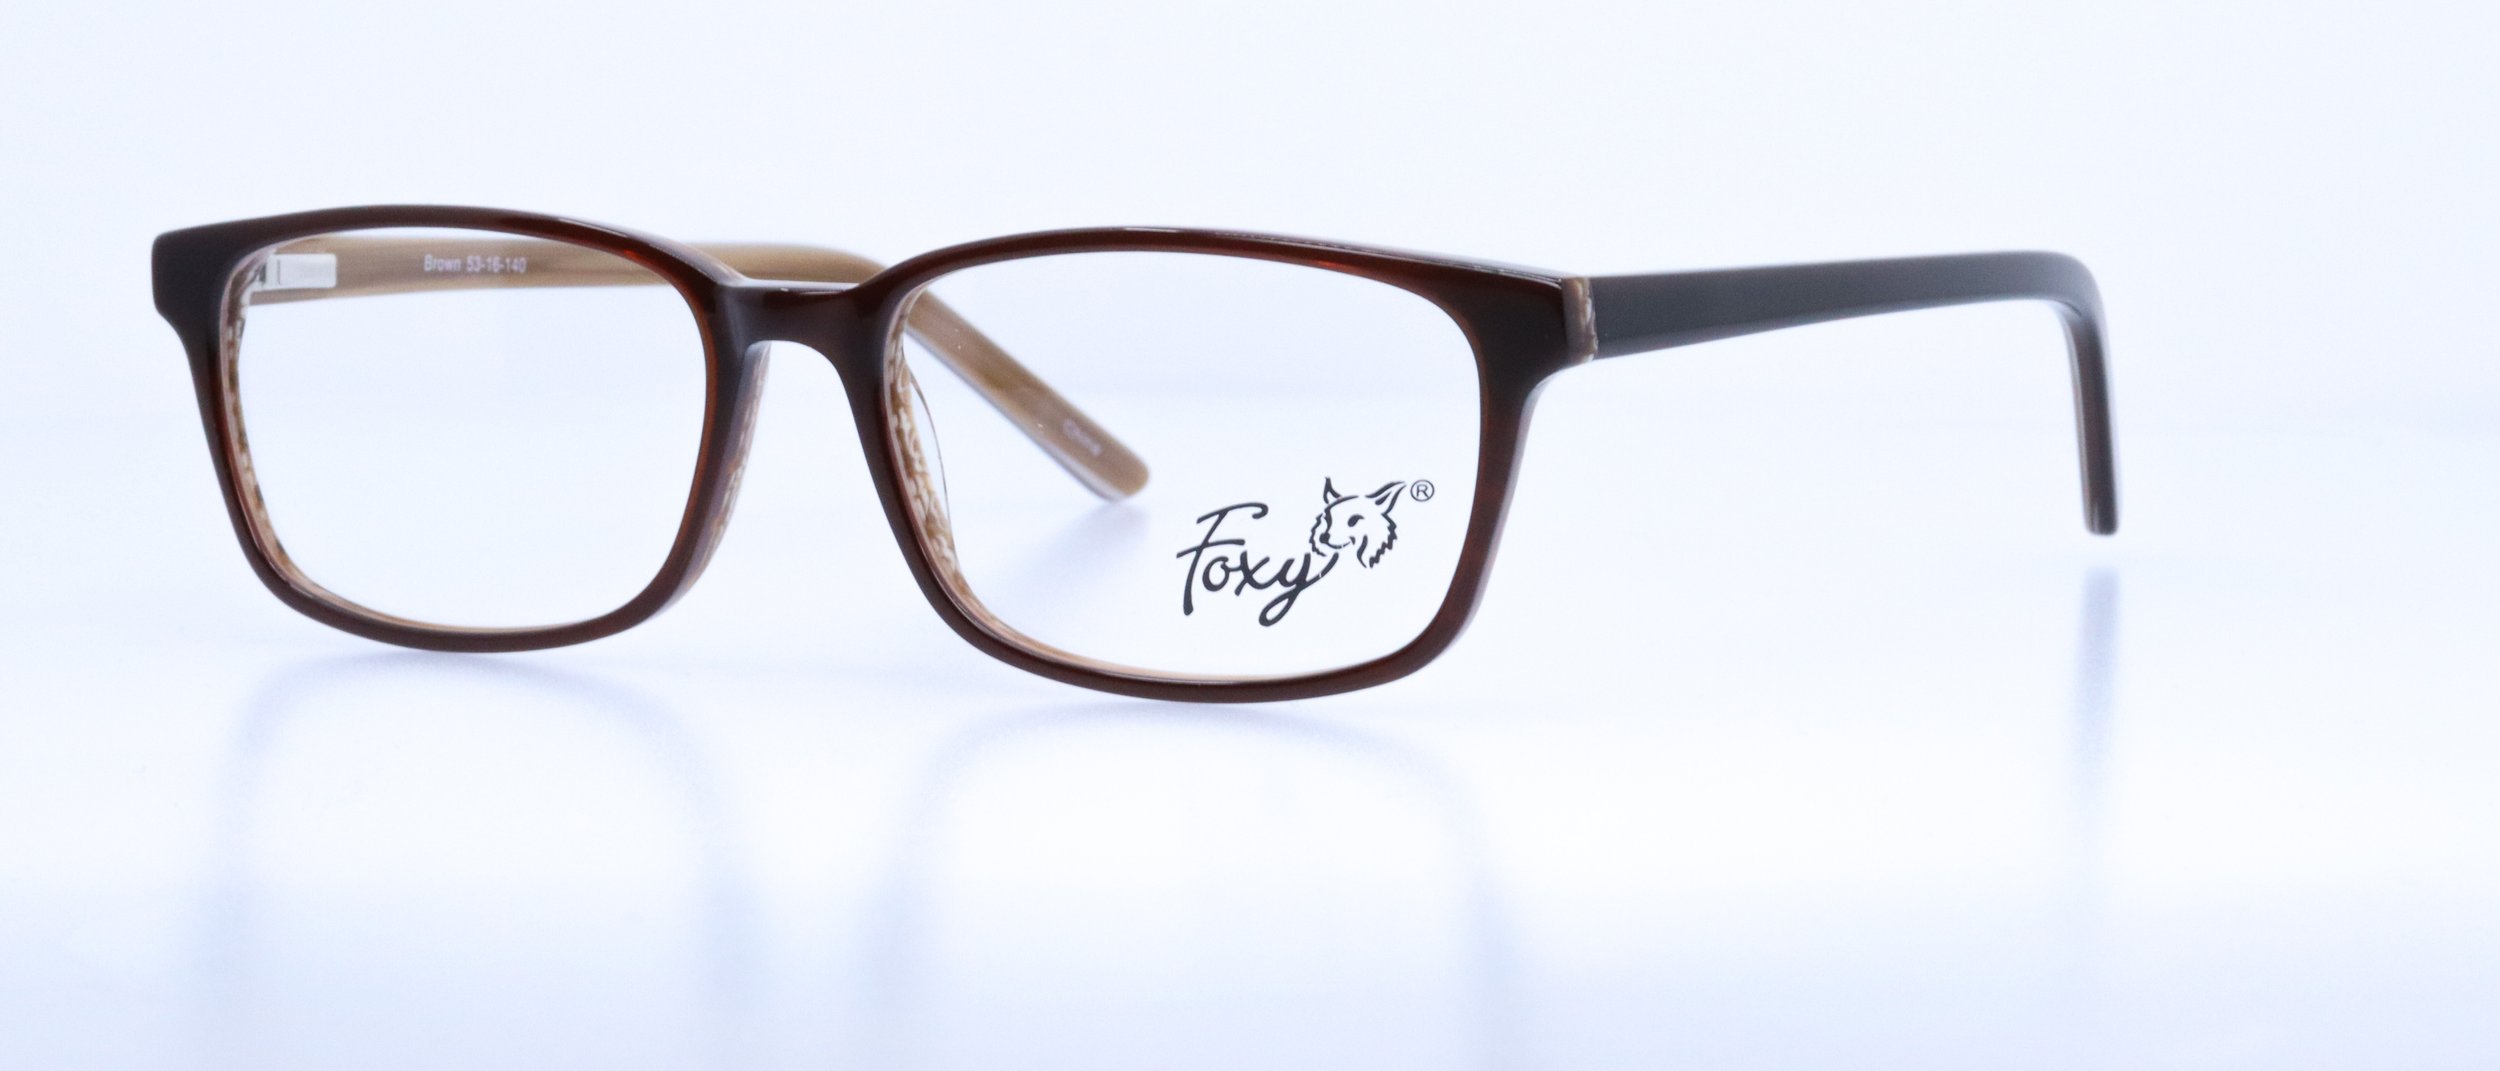  Bailey: 53-16-140, Available in Brown or Tortoise 